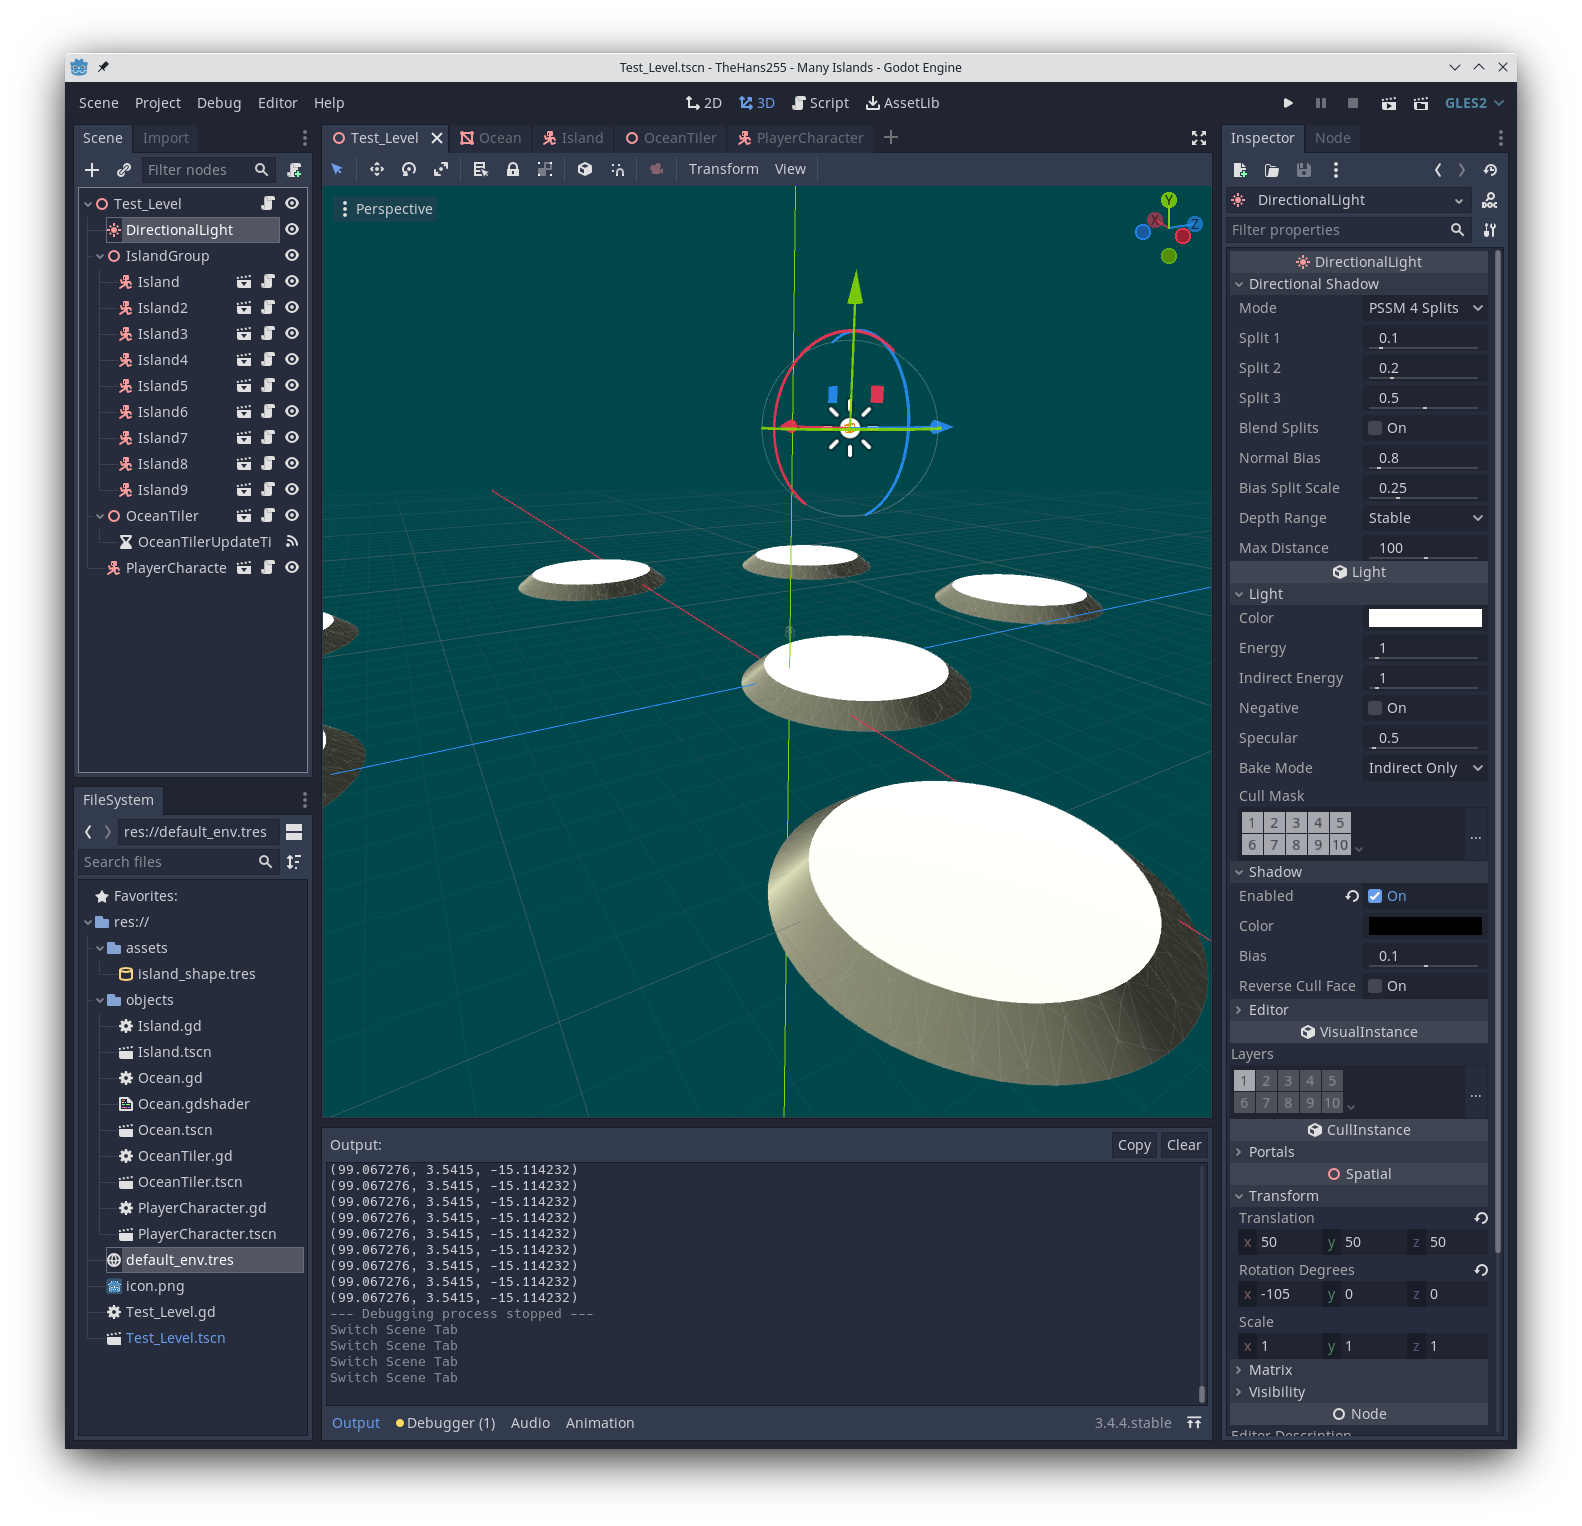 A sample of the Godot 3D editor